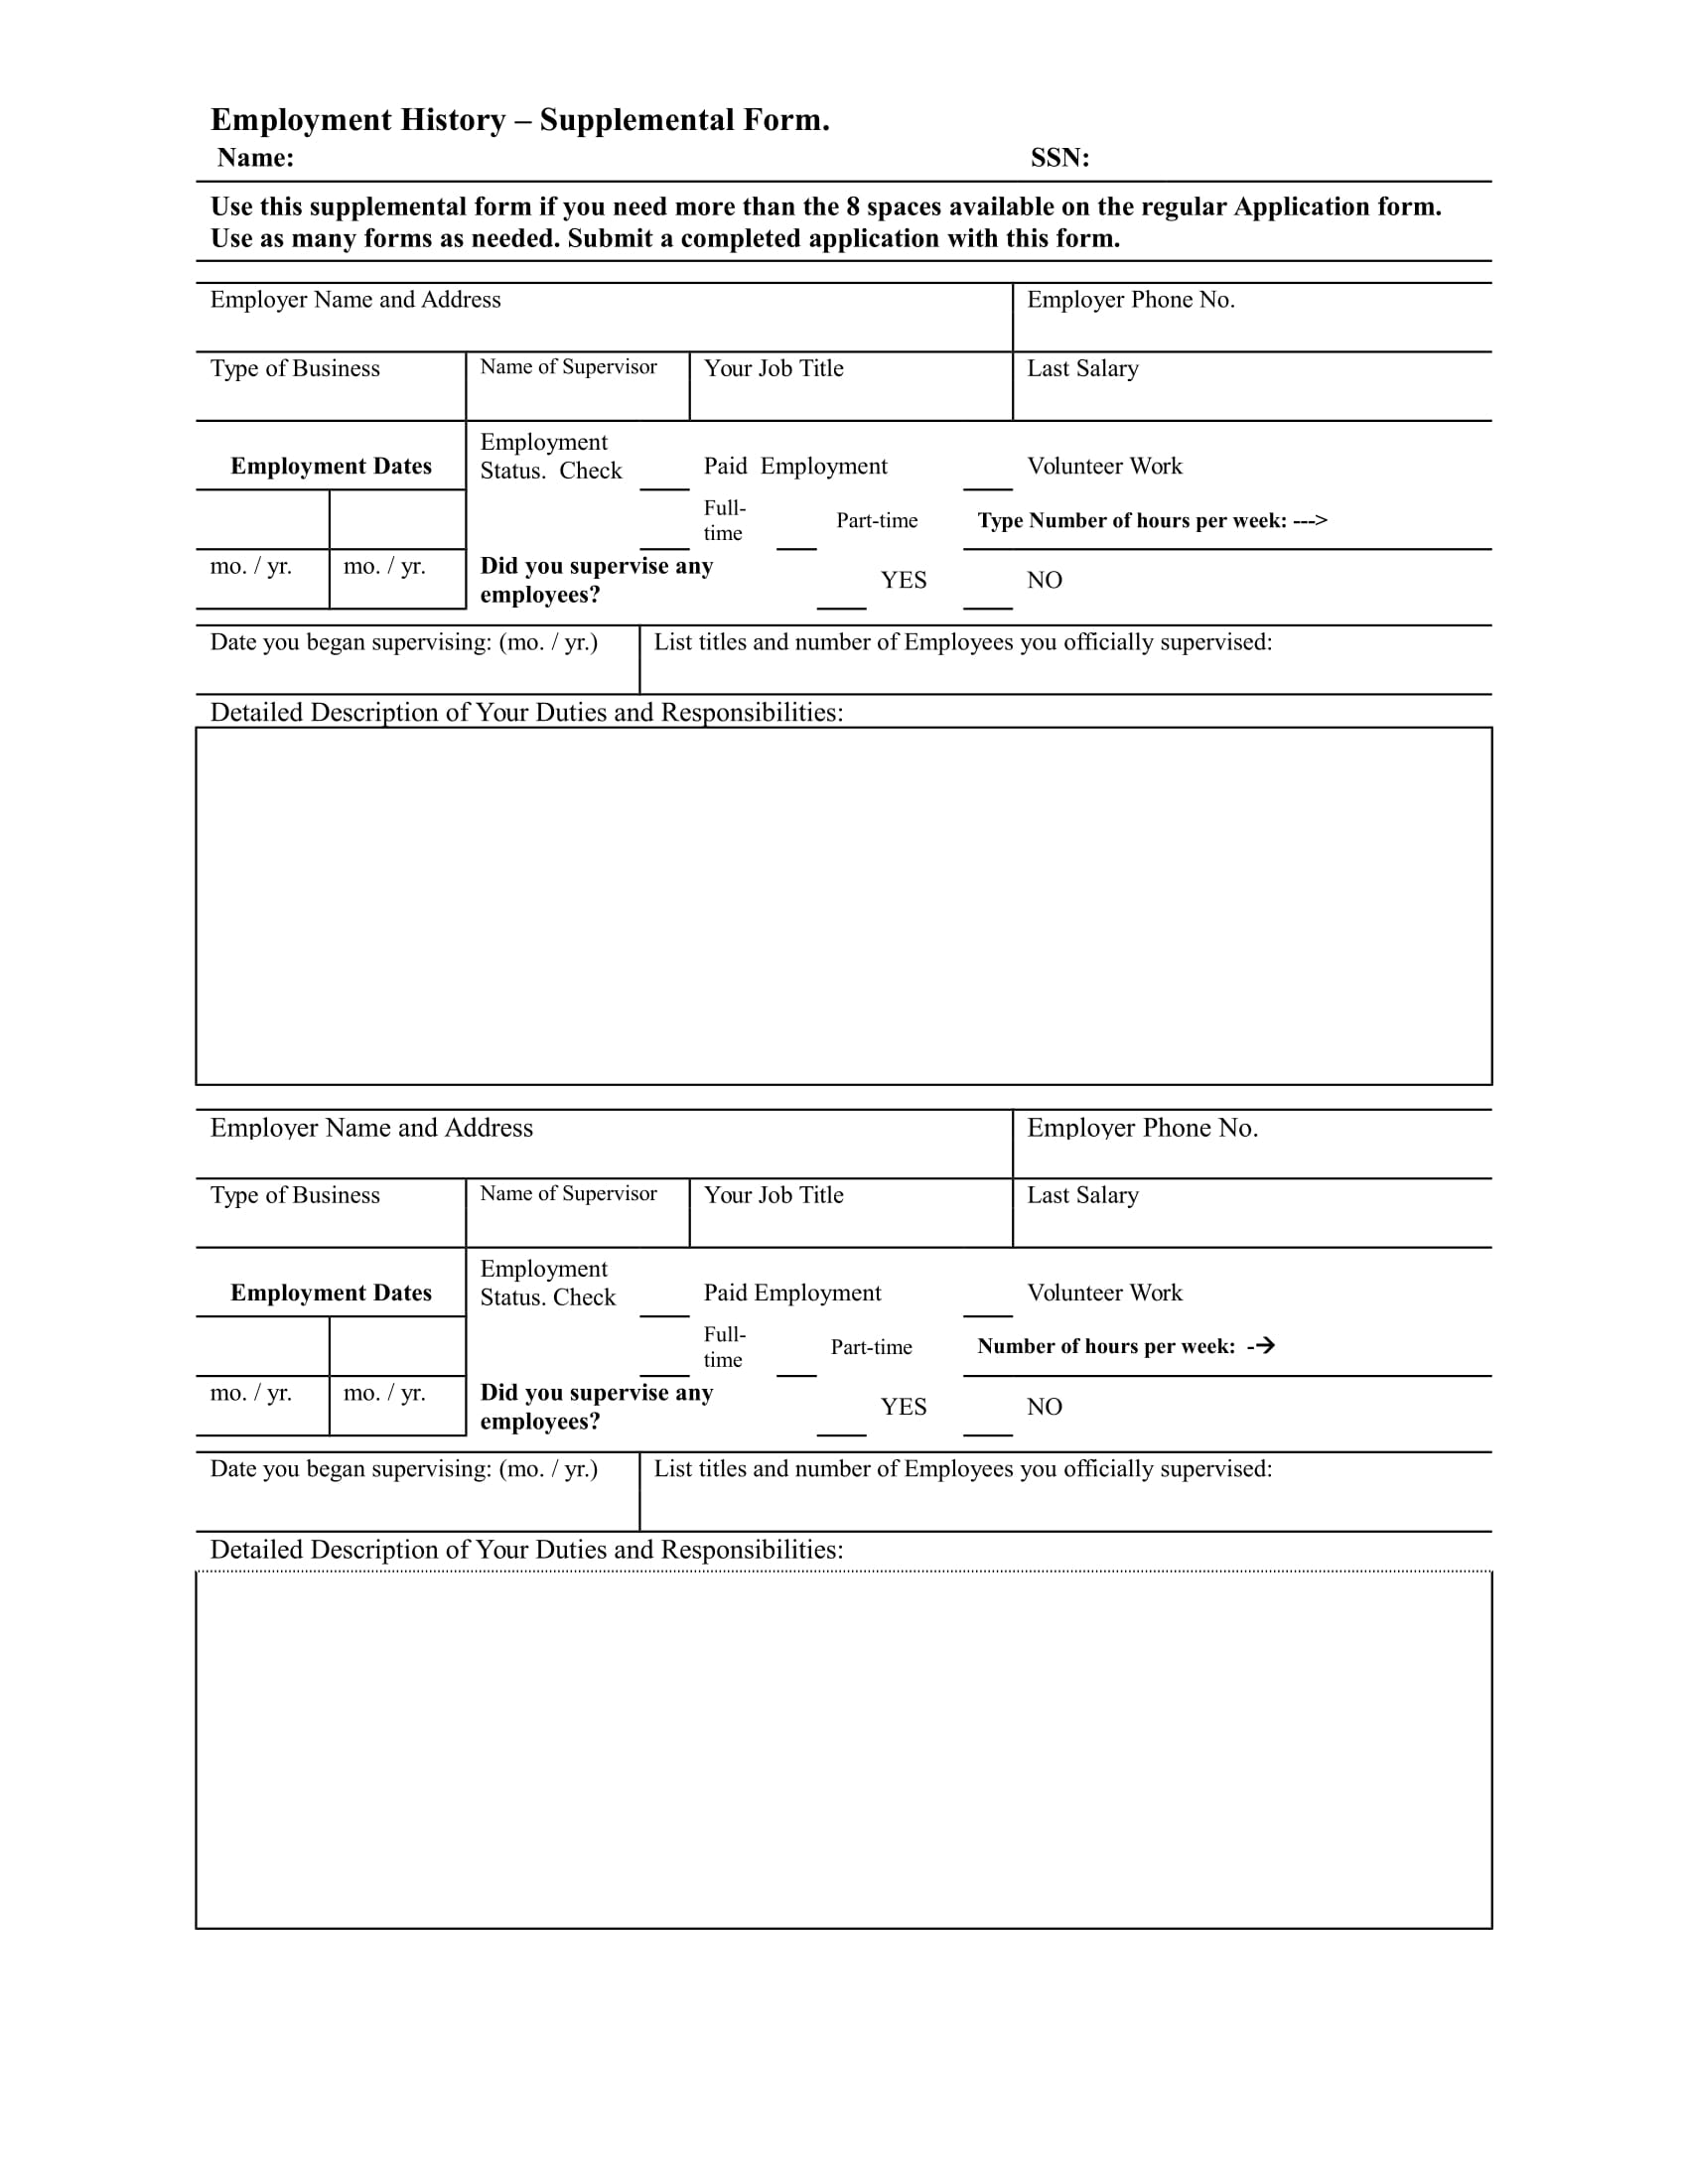 employment history supplemental form example